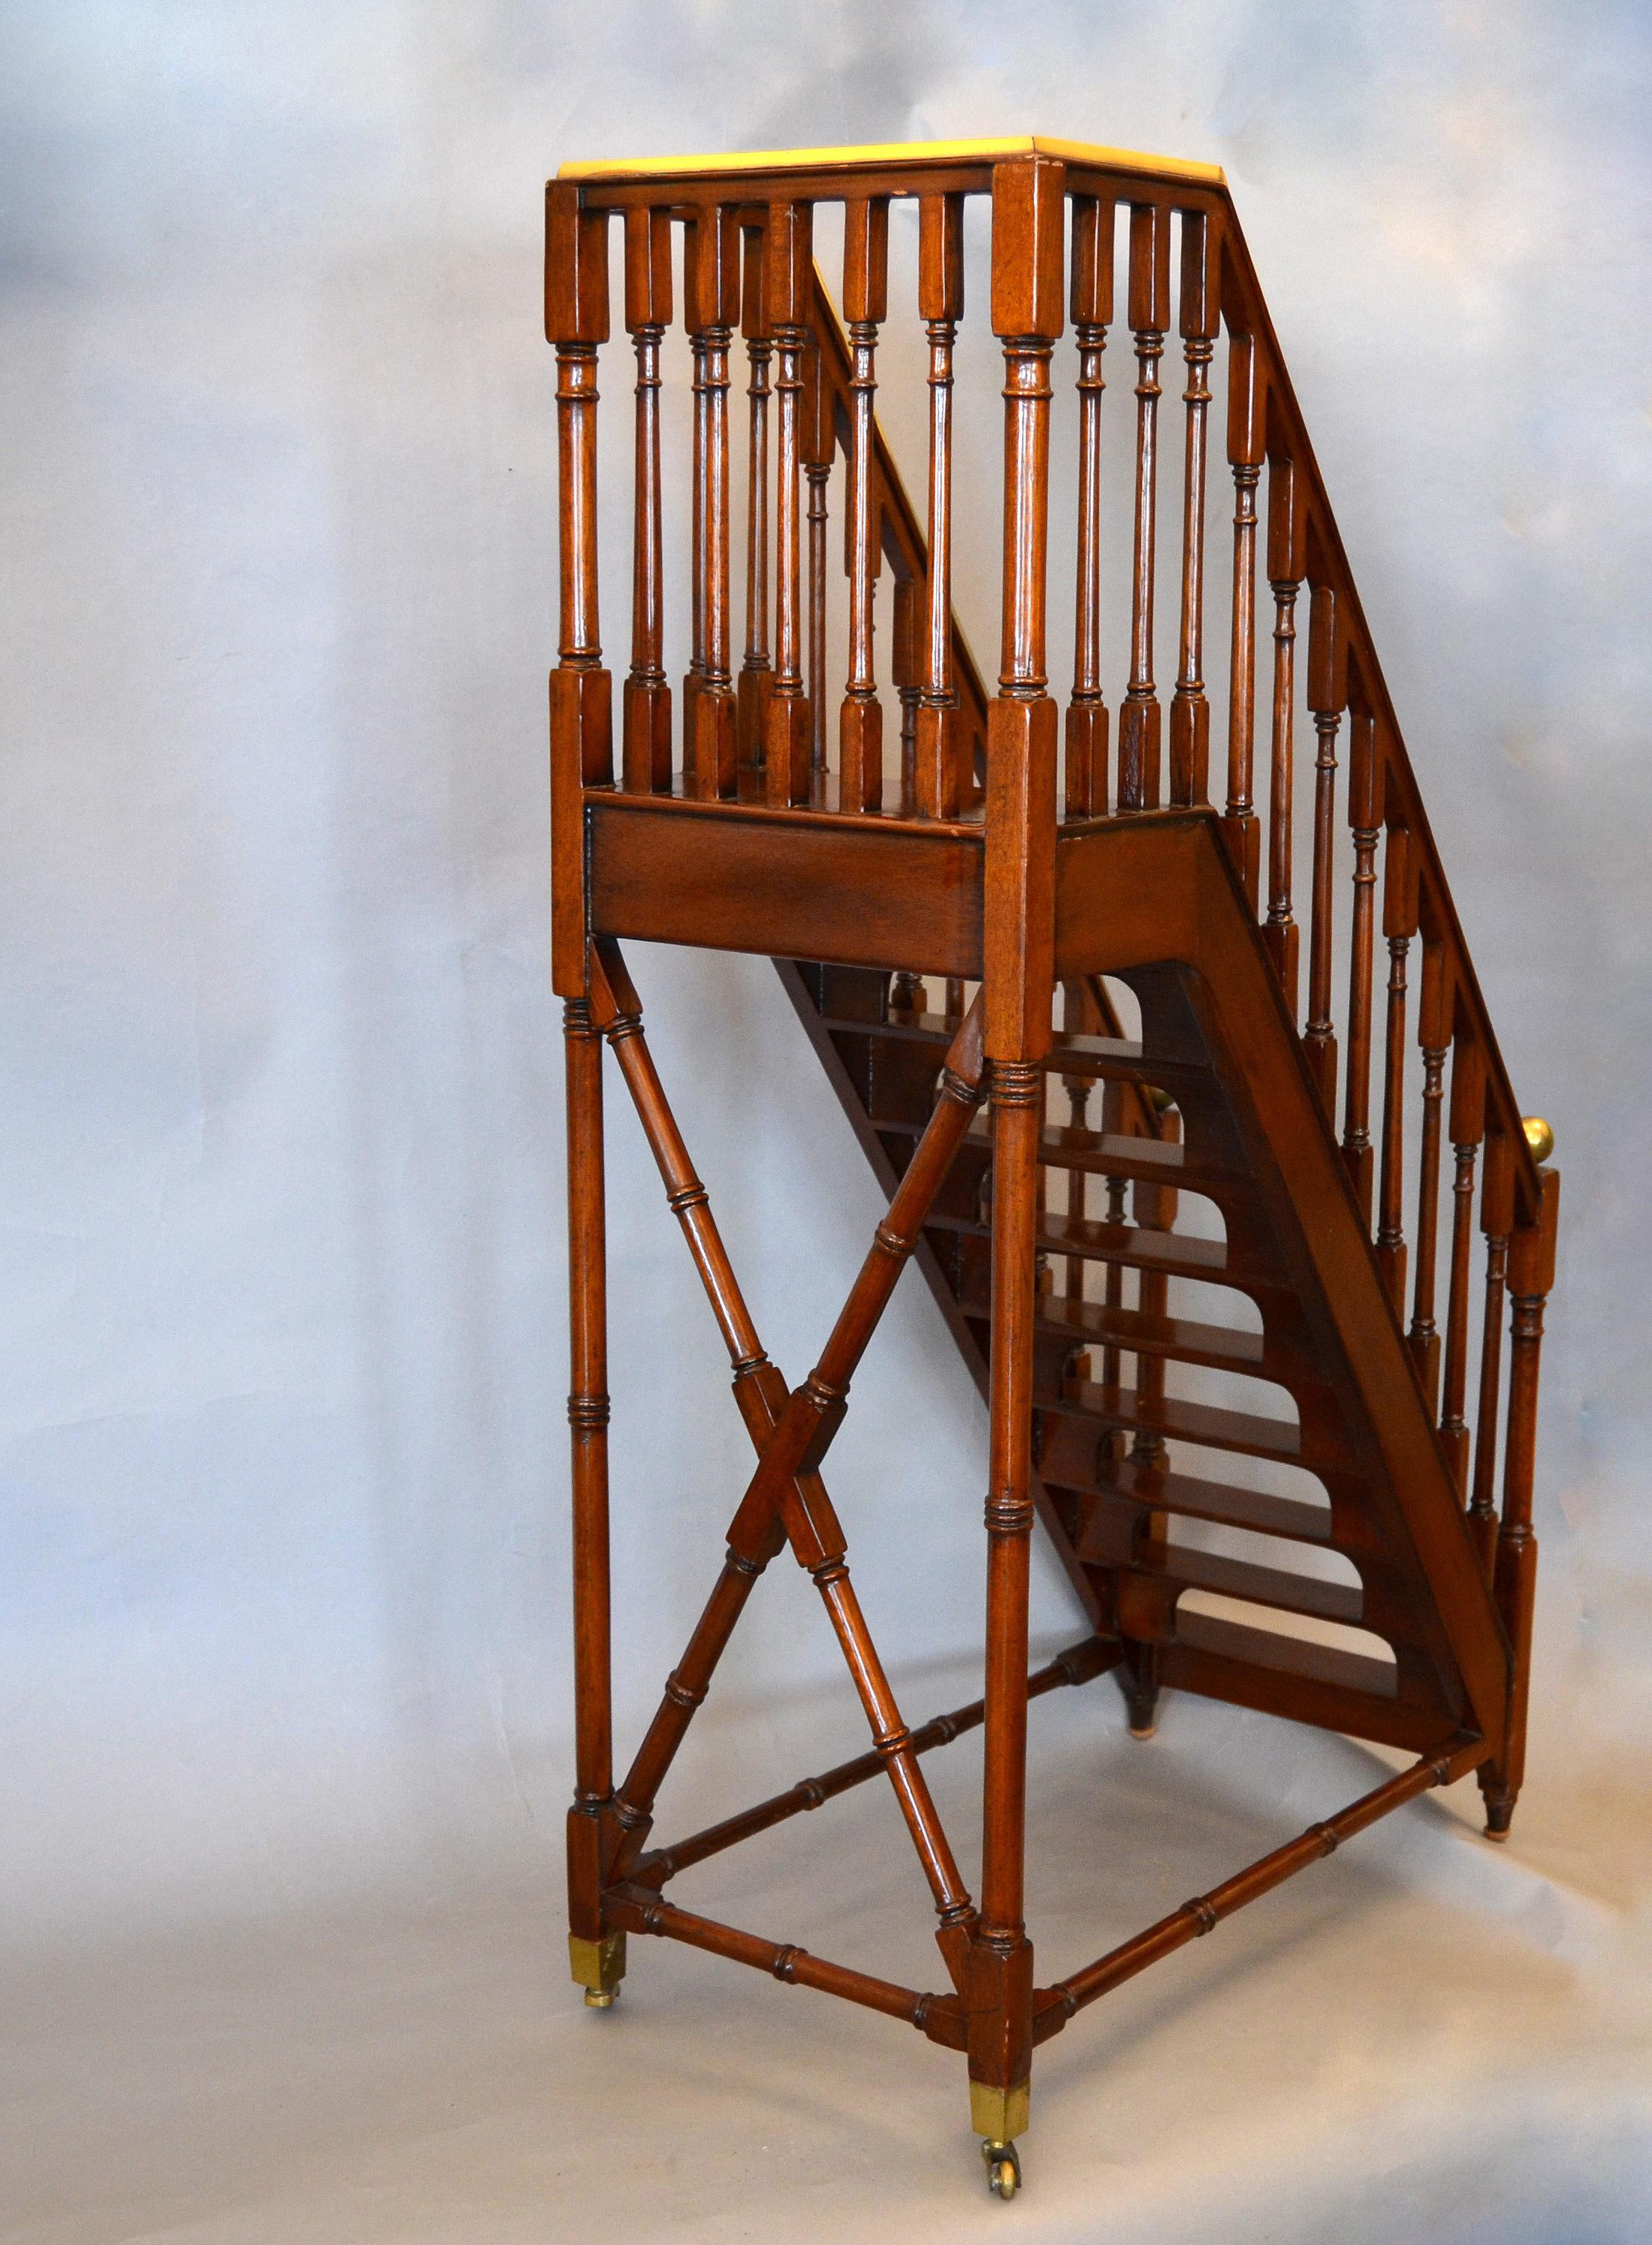 American Architectural Decorative Victorian Walnut and Brass Library Steps Ladder, Stairs